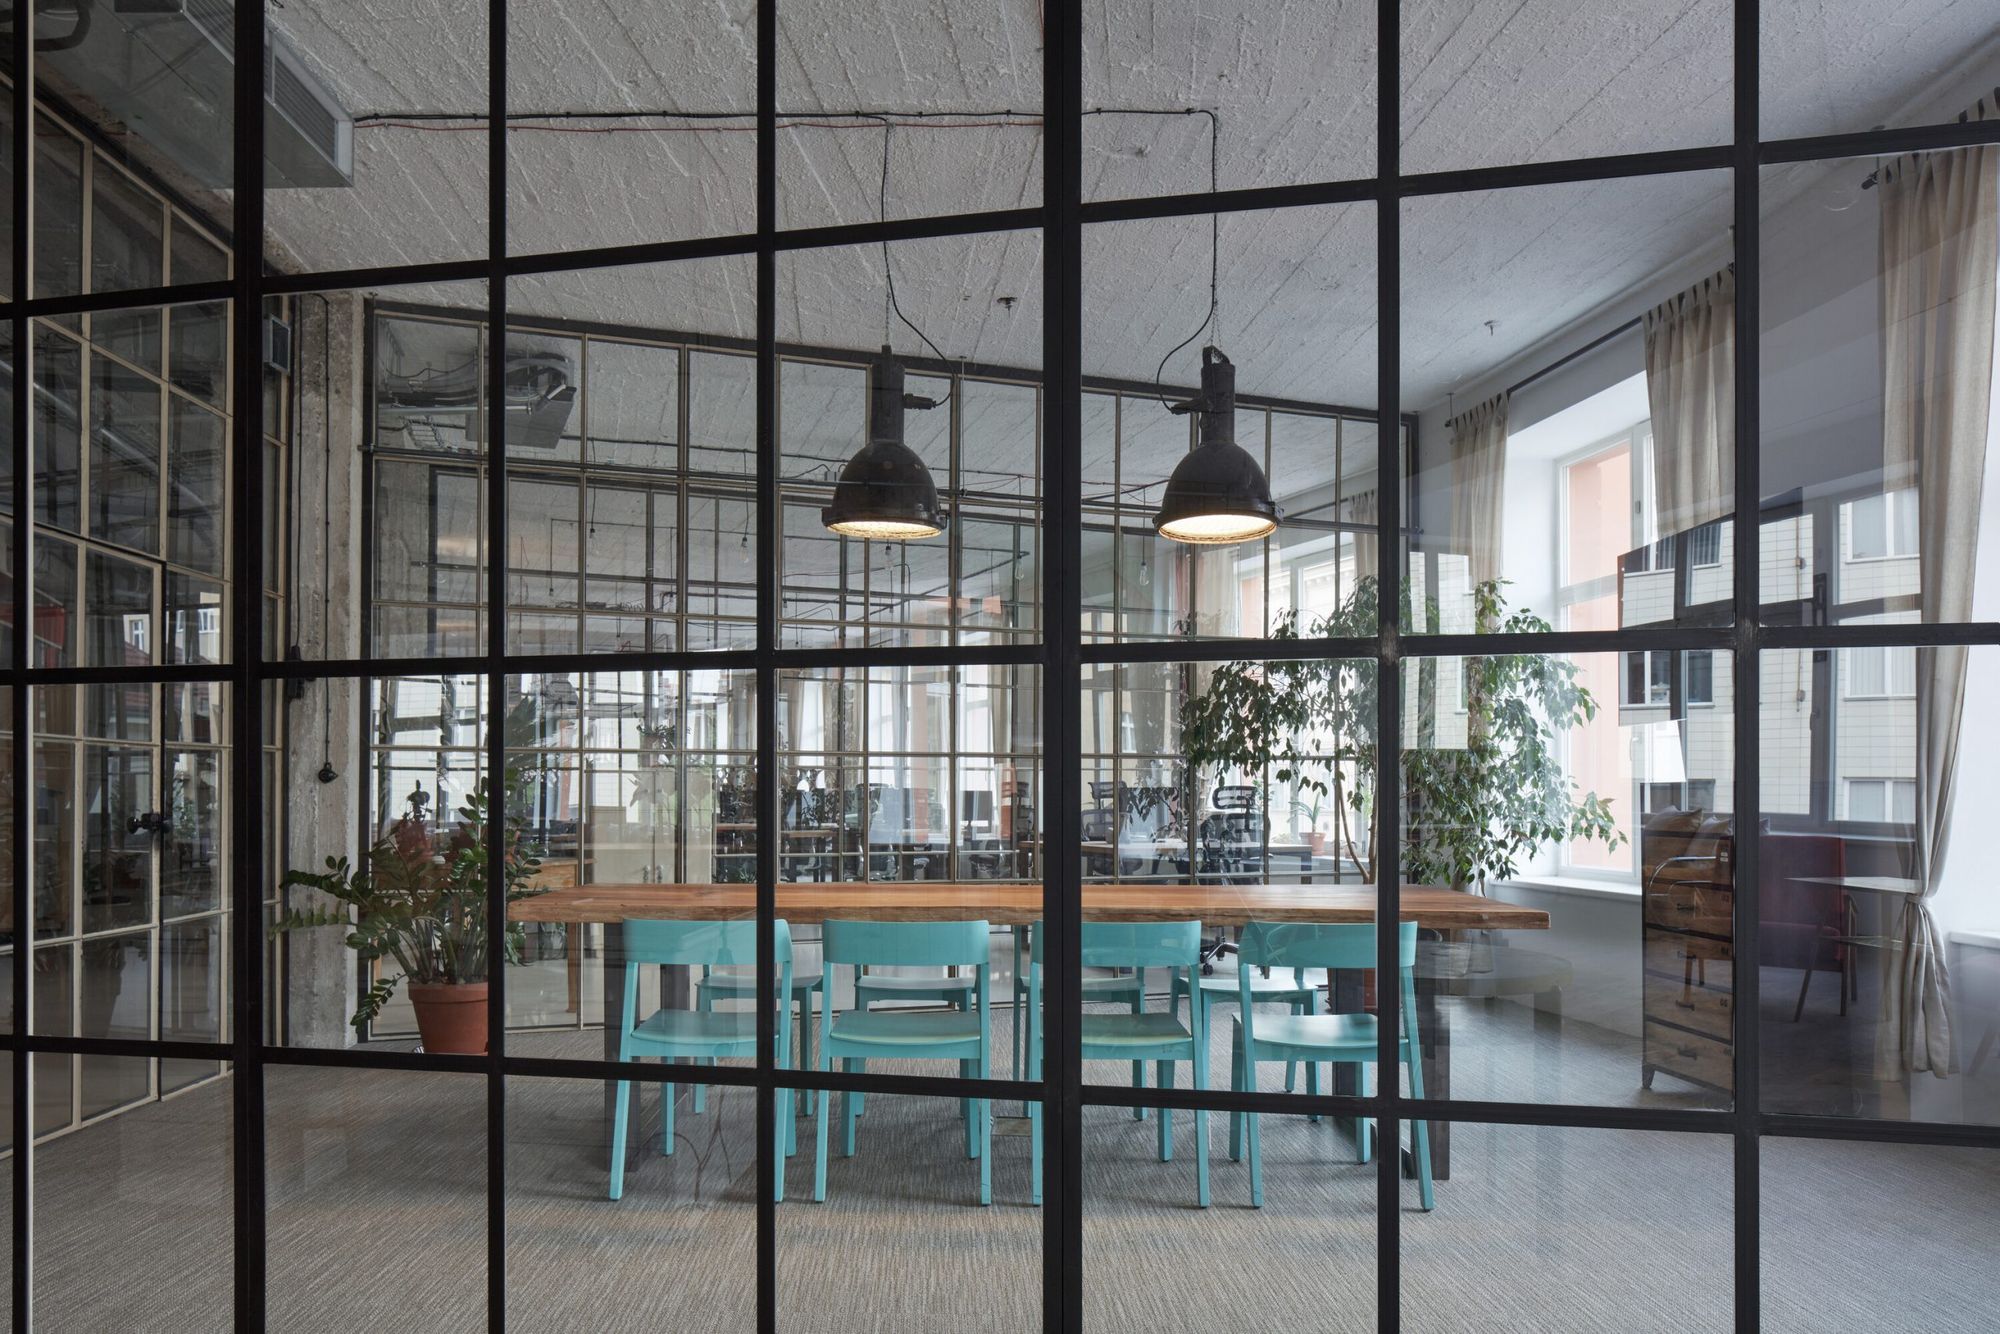 Office spaces with an industrial vibe | Kurz architekti